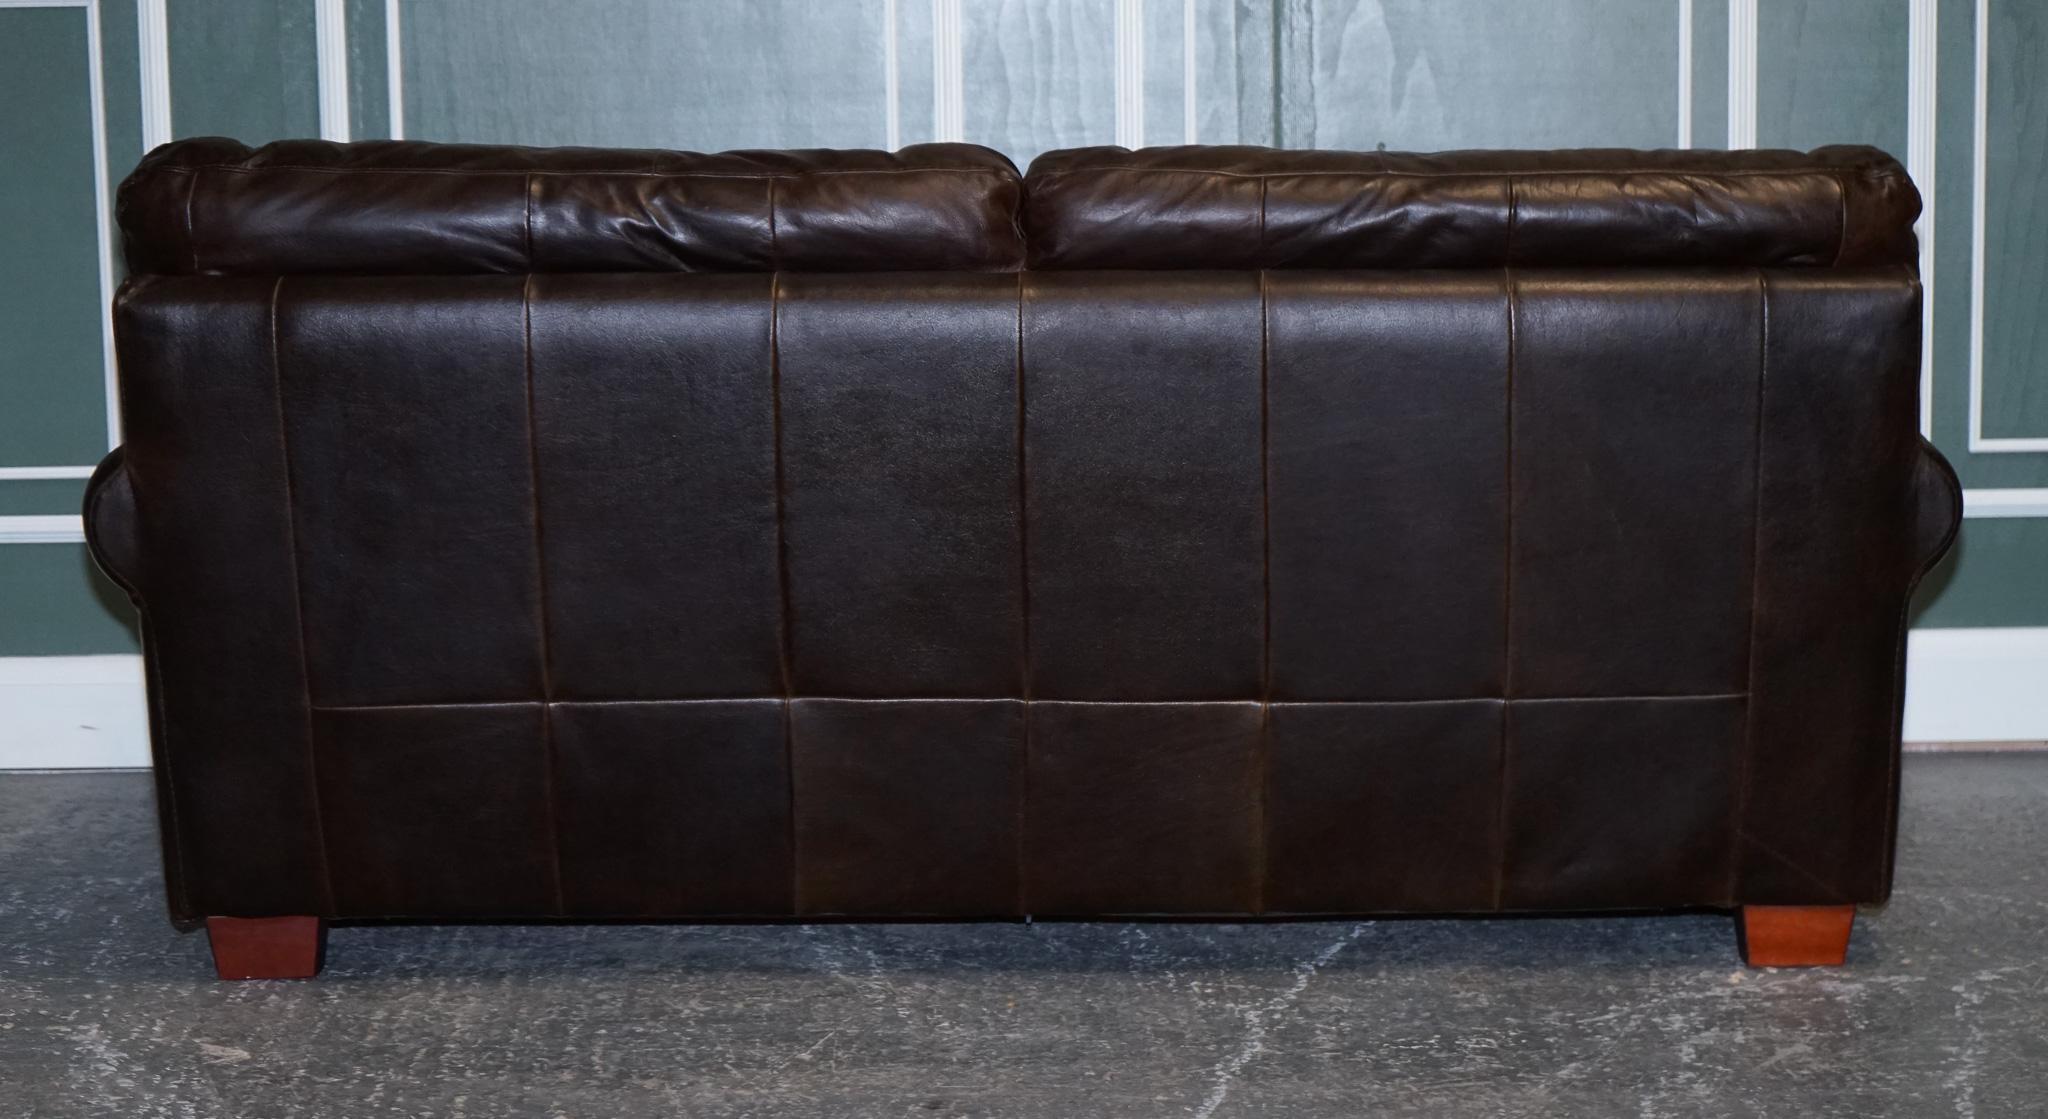 ViNTAGE CHOCOLATE BROWN TWO TO THREE SEATER SOFA For Sale 4